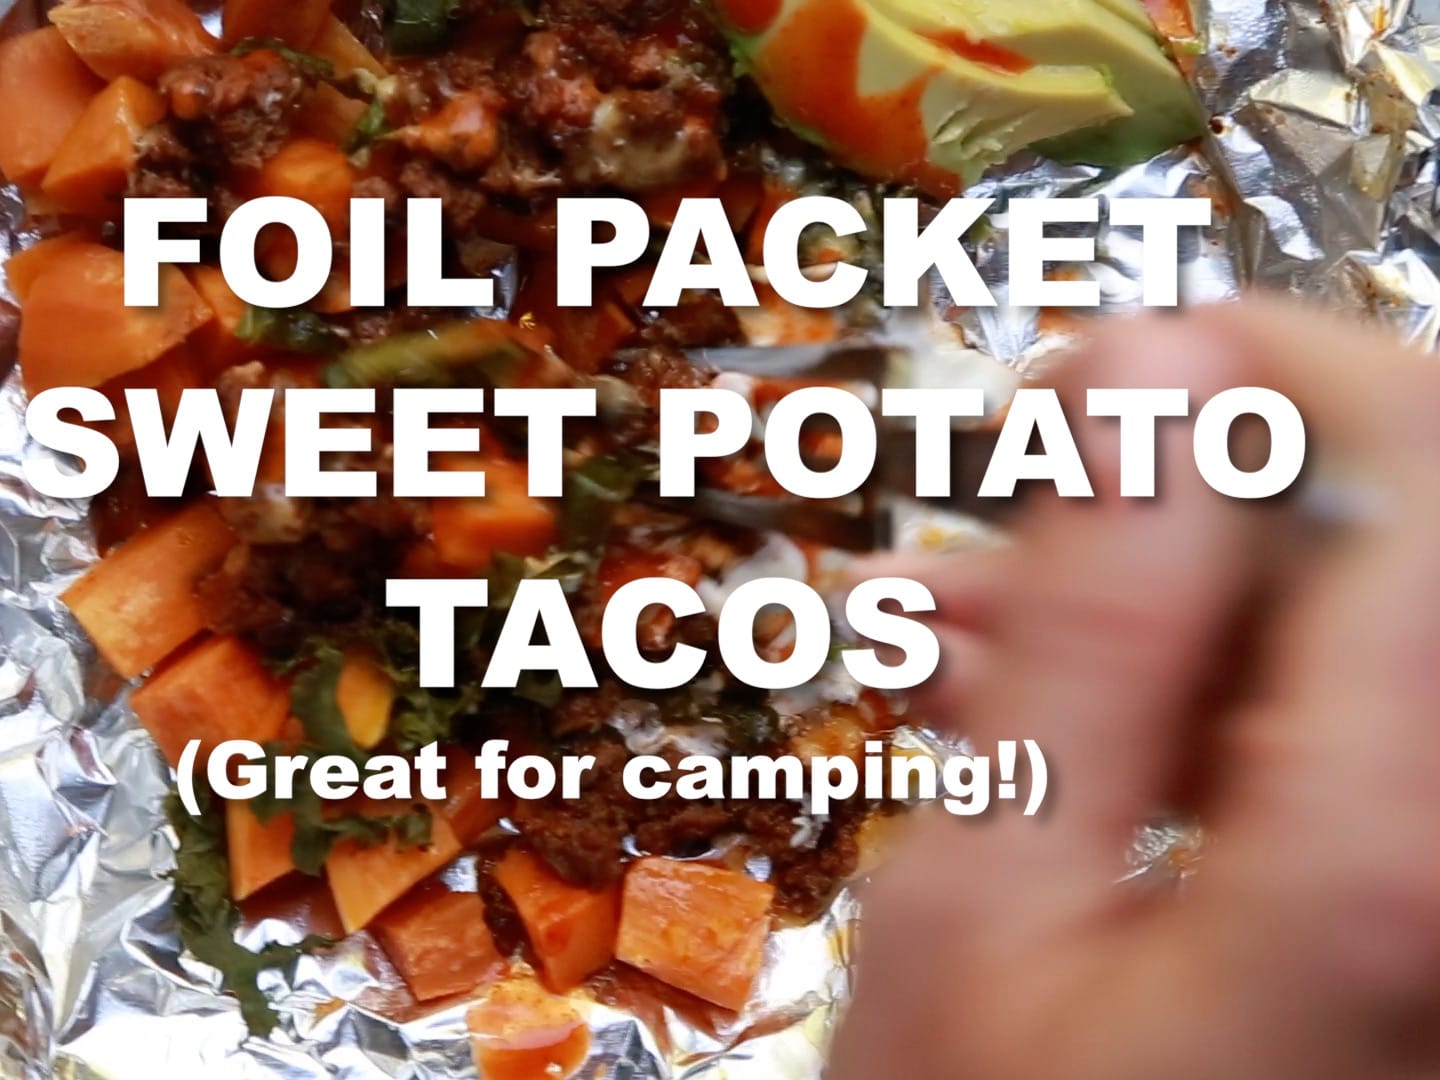 Easy Camping Skillet BBQ Recipe with Ground Meat and Sweet Potatoes